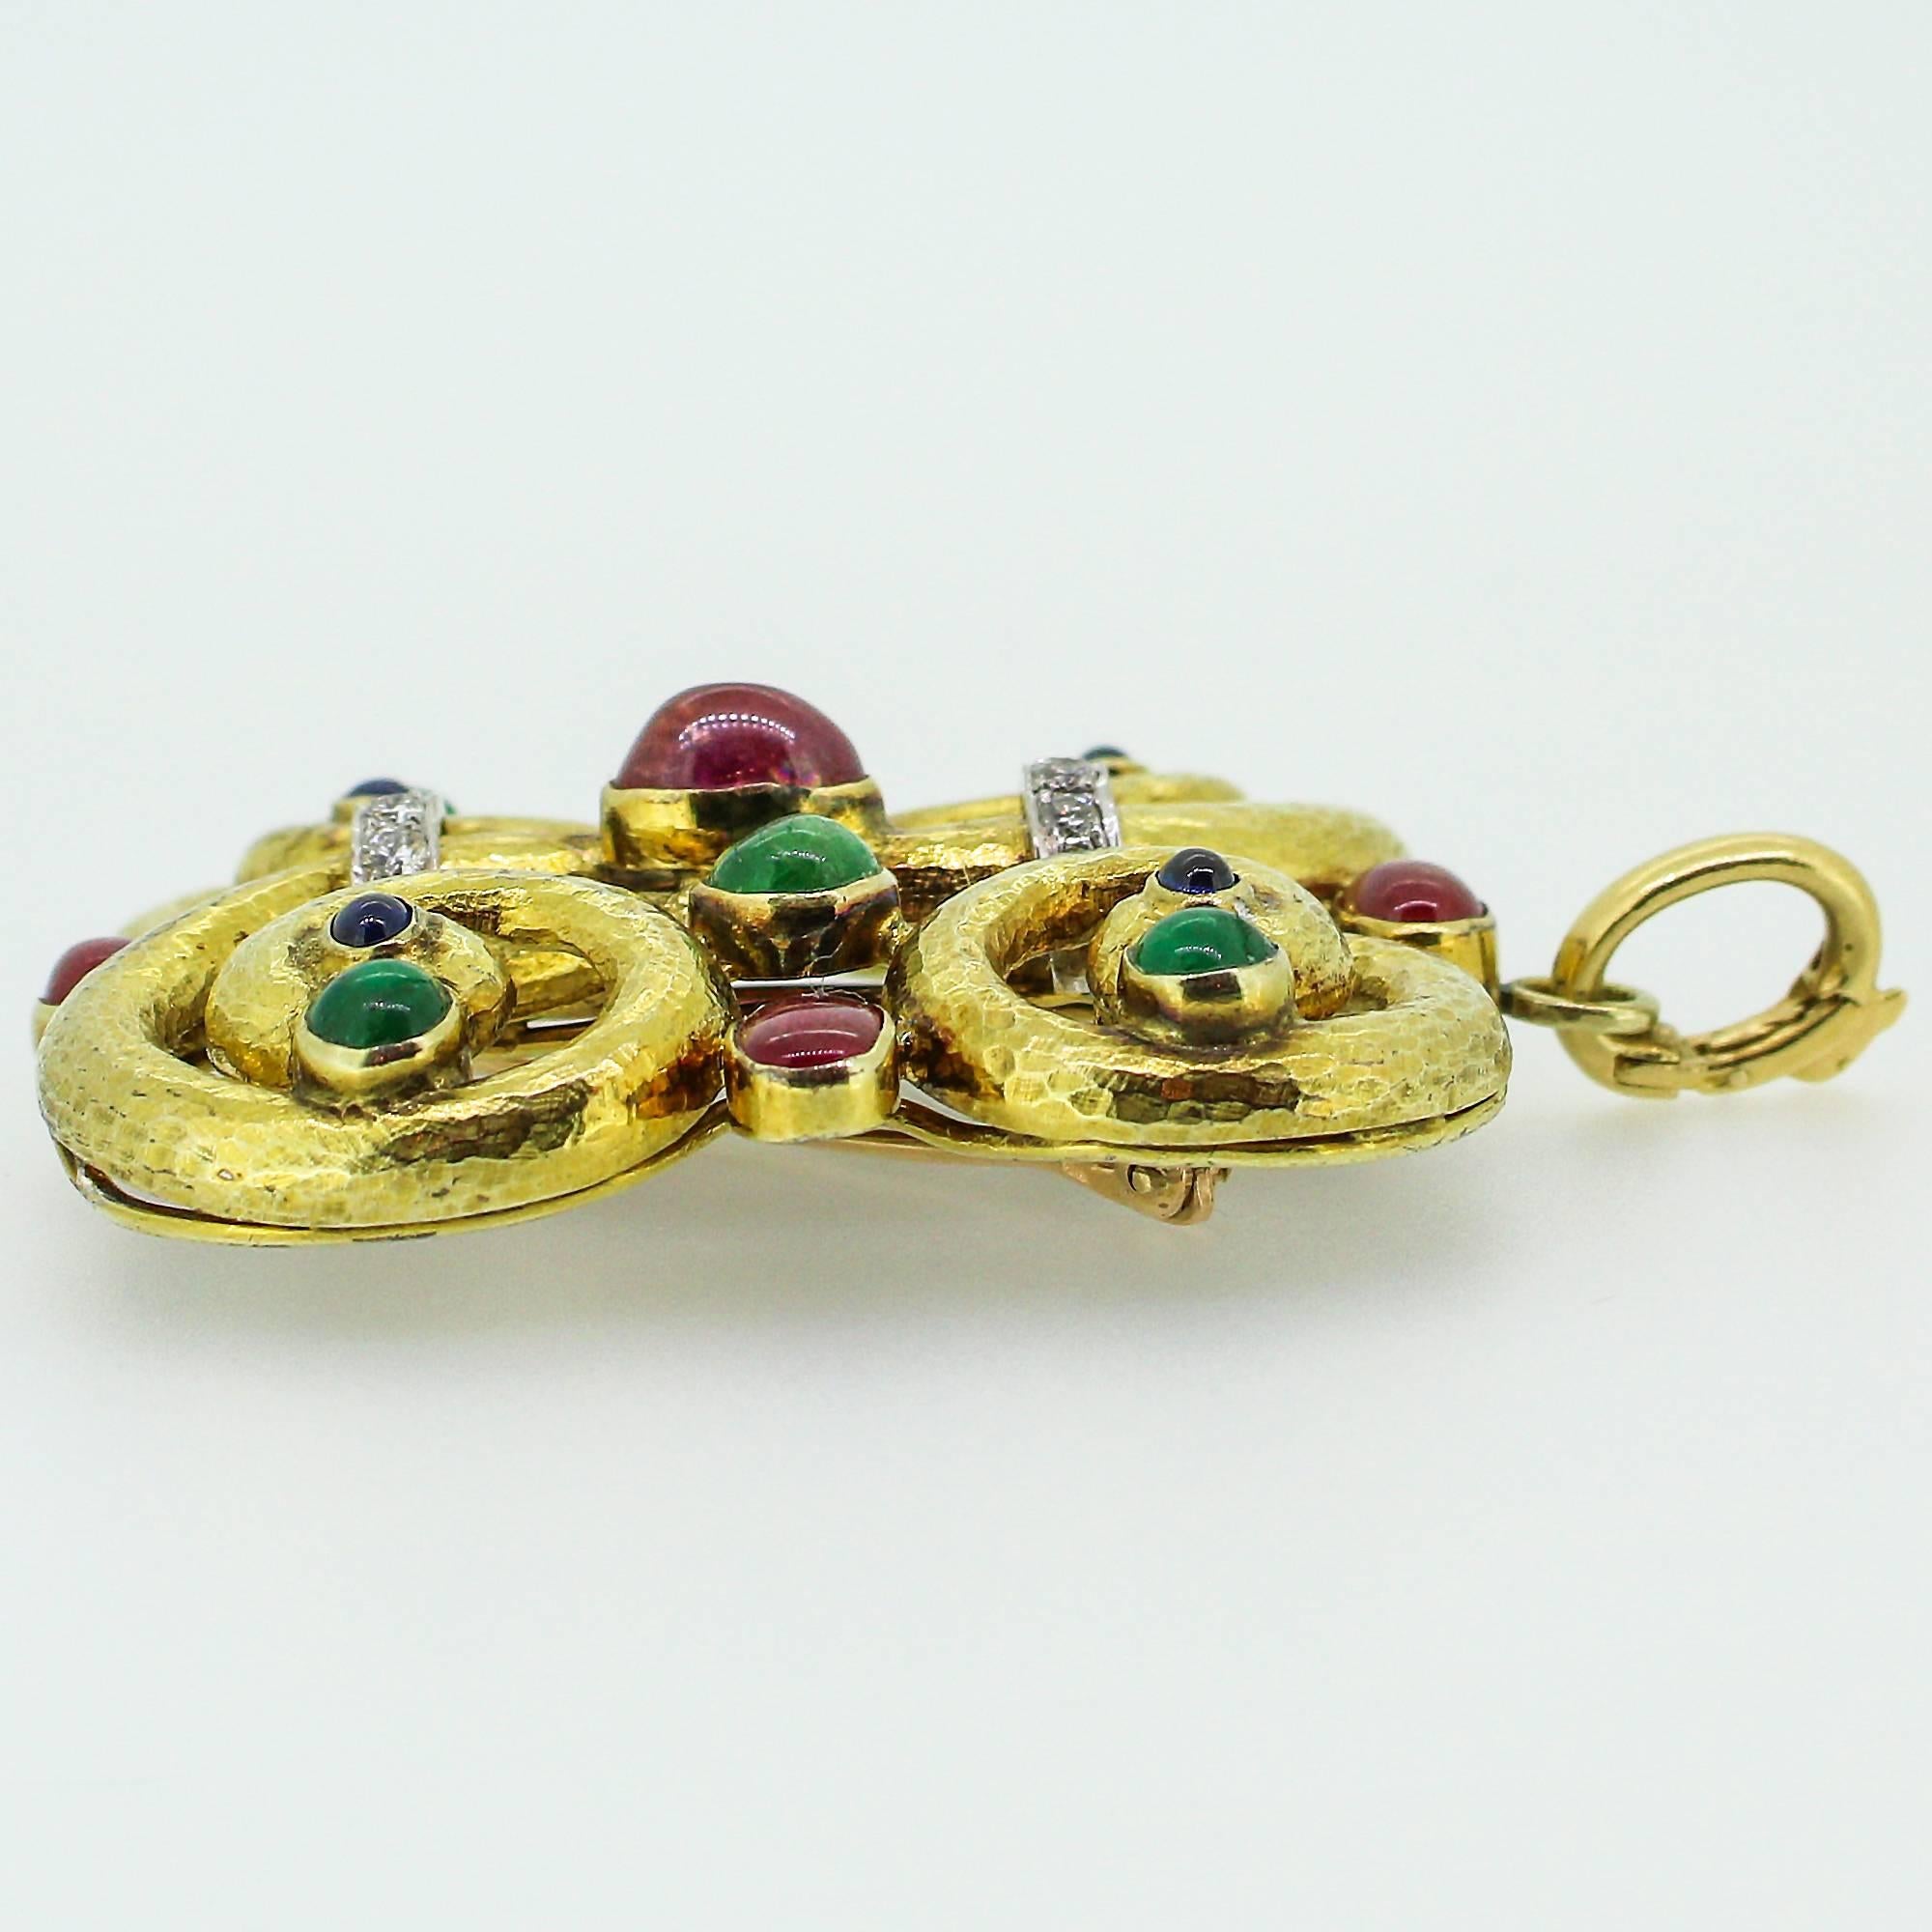 This phenomenal pendant/brooch gives is a perfect product of the 1960s-70s. With it's hammered, yellow gold finish and colorful cabochon precious gemstones, it allows the wearer many different options. It can be worn as a brooch or the removable